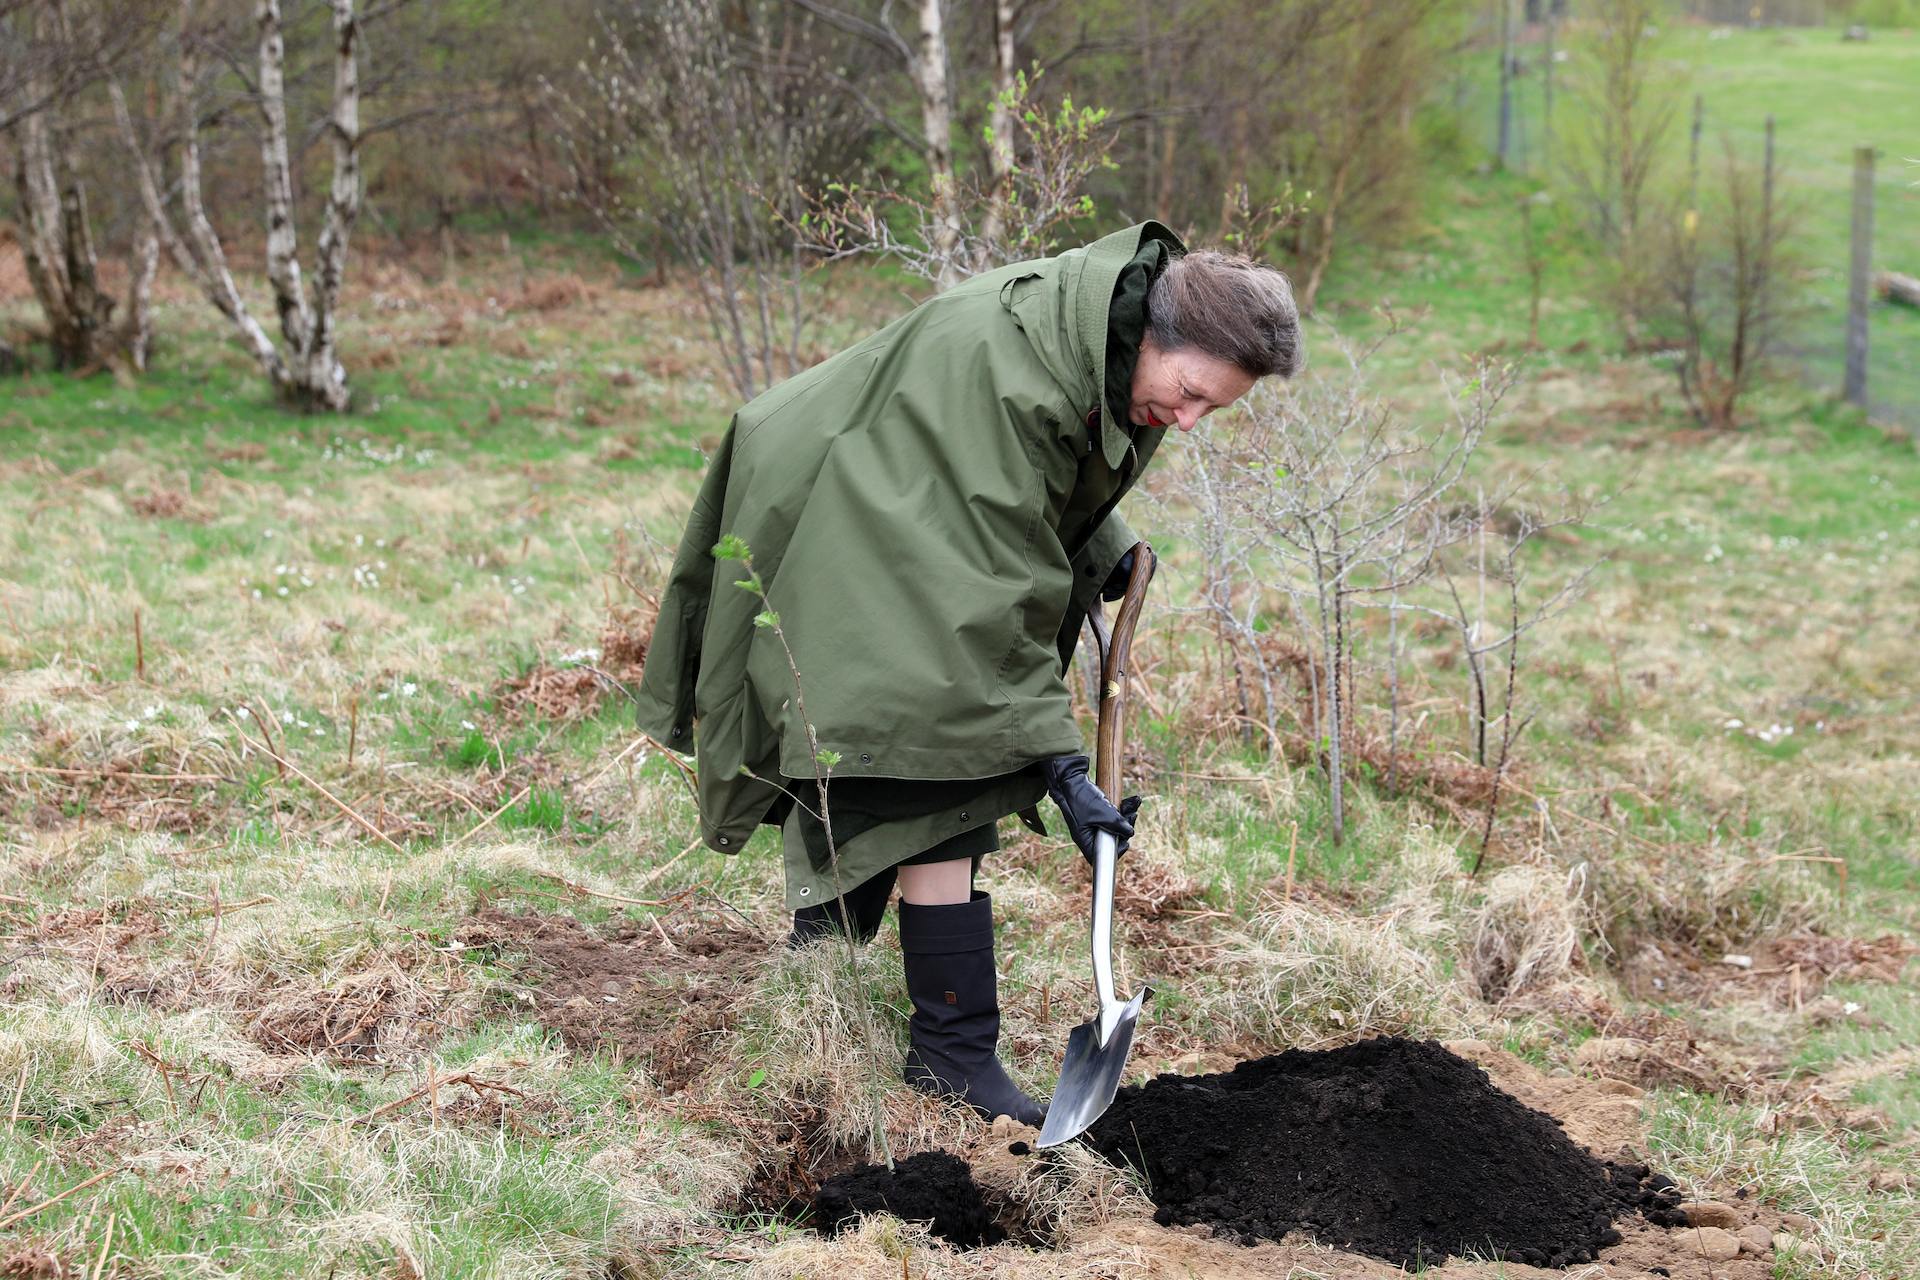 HRH Princess Royal planting tree to mark site of Scotland's Wildlife discovery Centre

Image: LAURA MOORE 2022